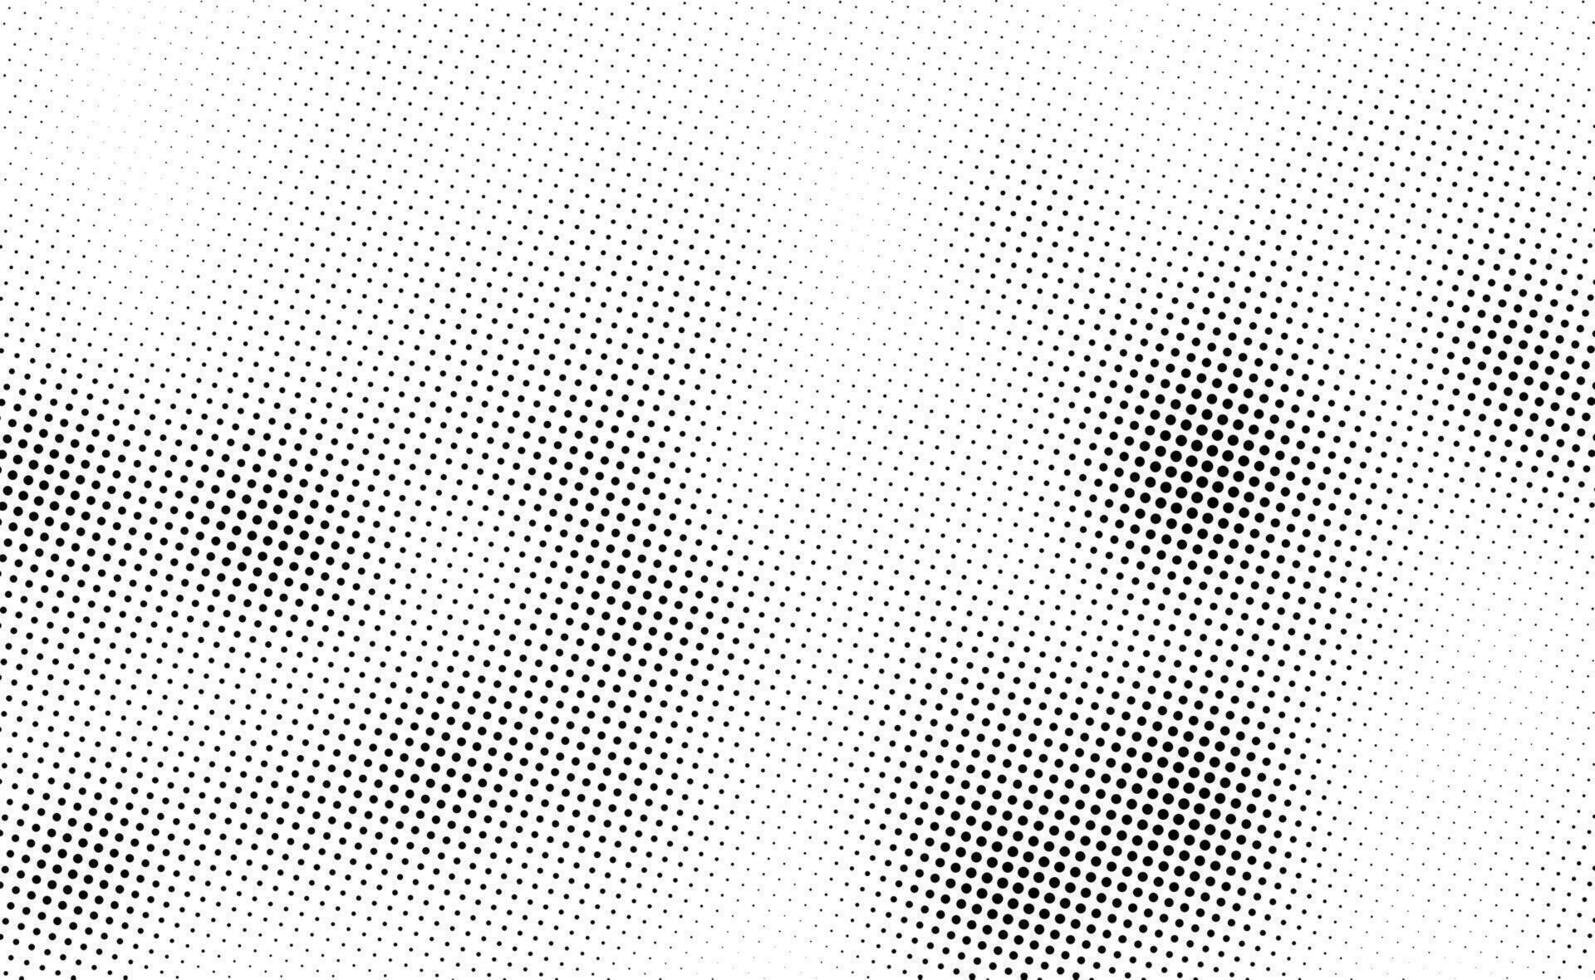 dot halftone village black, halftone, vector, texture, abstract, cyan, spot, round, design, background, graphic, ink, swatch, illustration, blue, color, vector